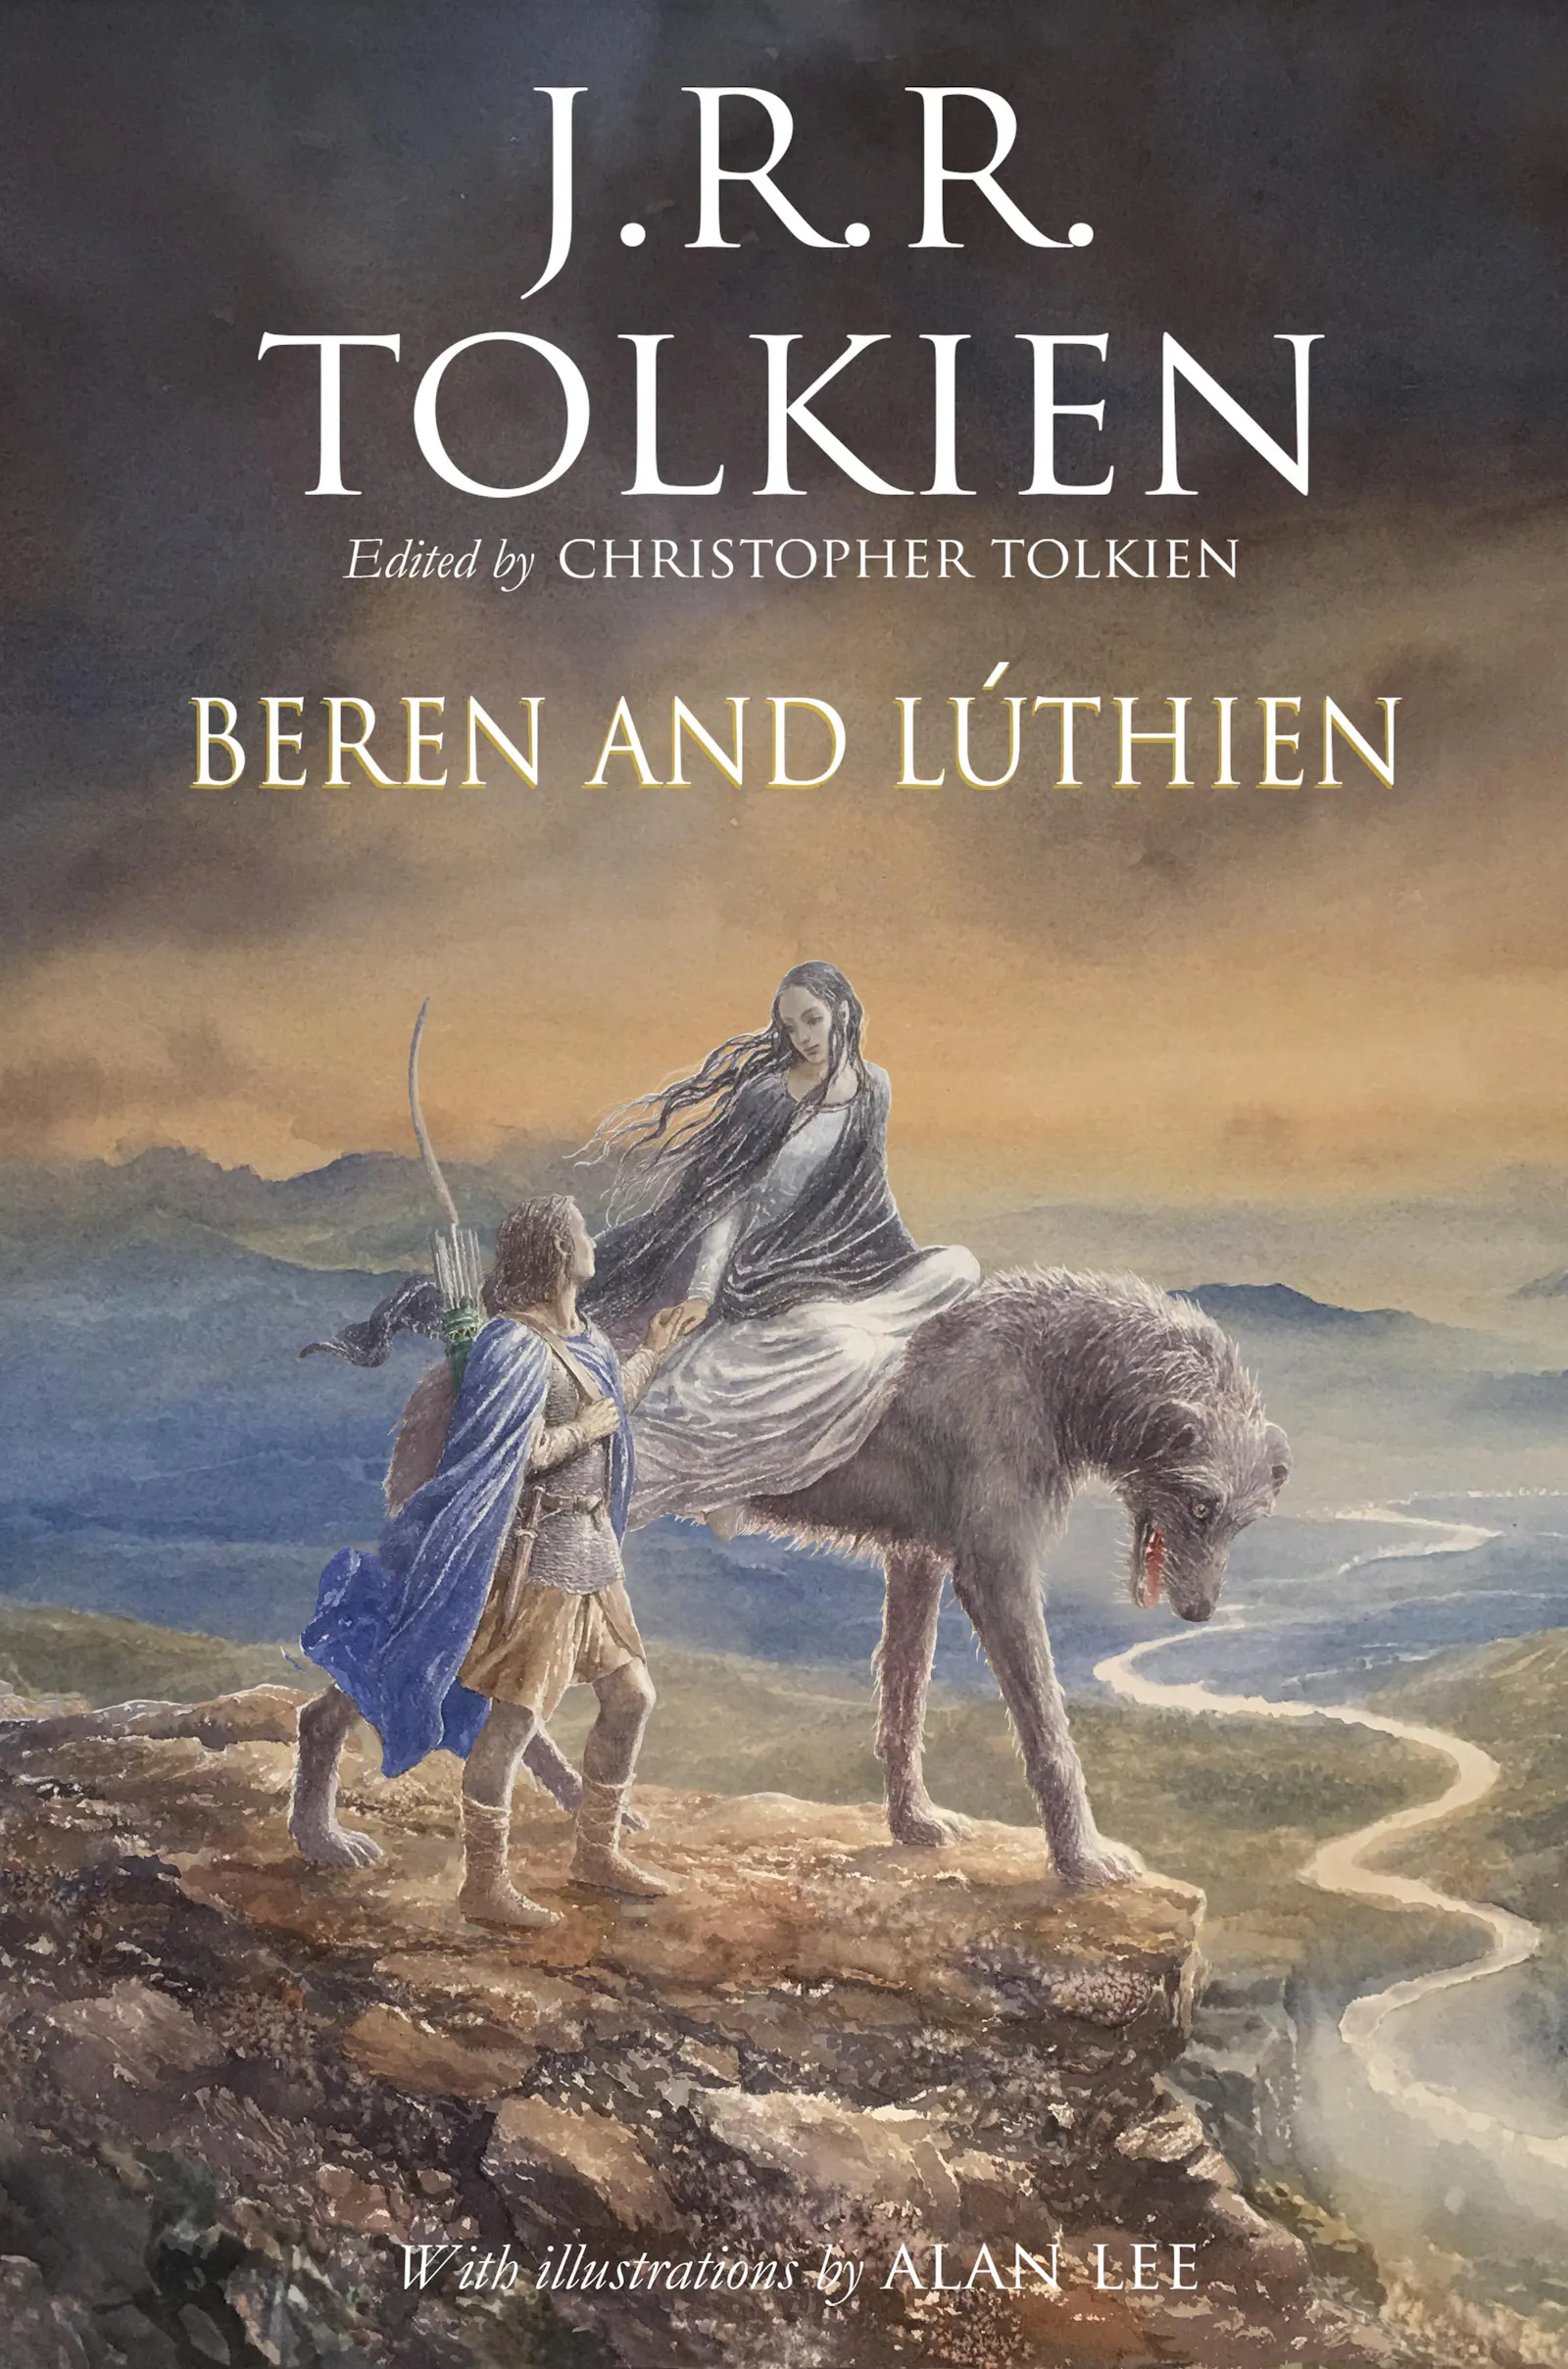 Beren and Lúthien by JRR Tolkien, illustrated by Alan Lee